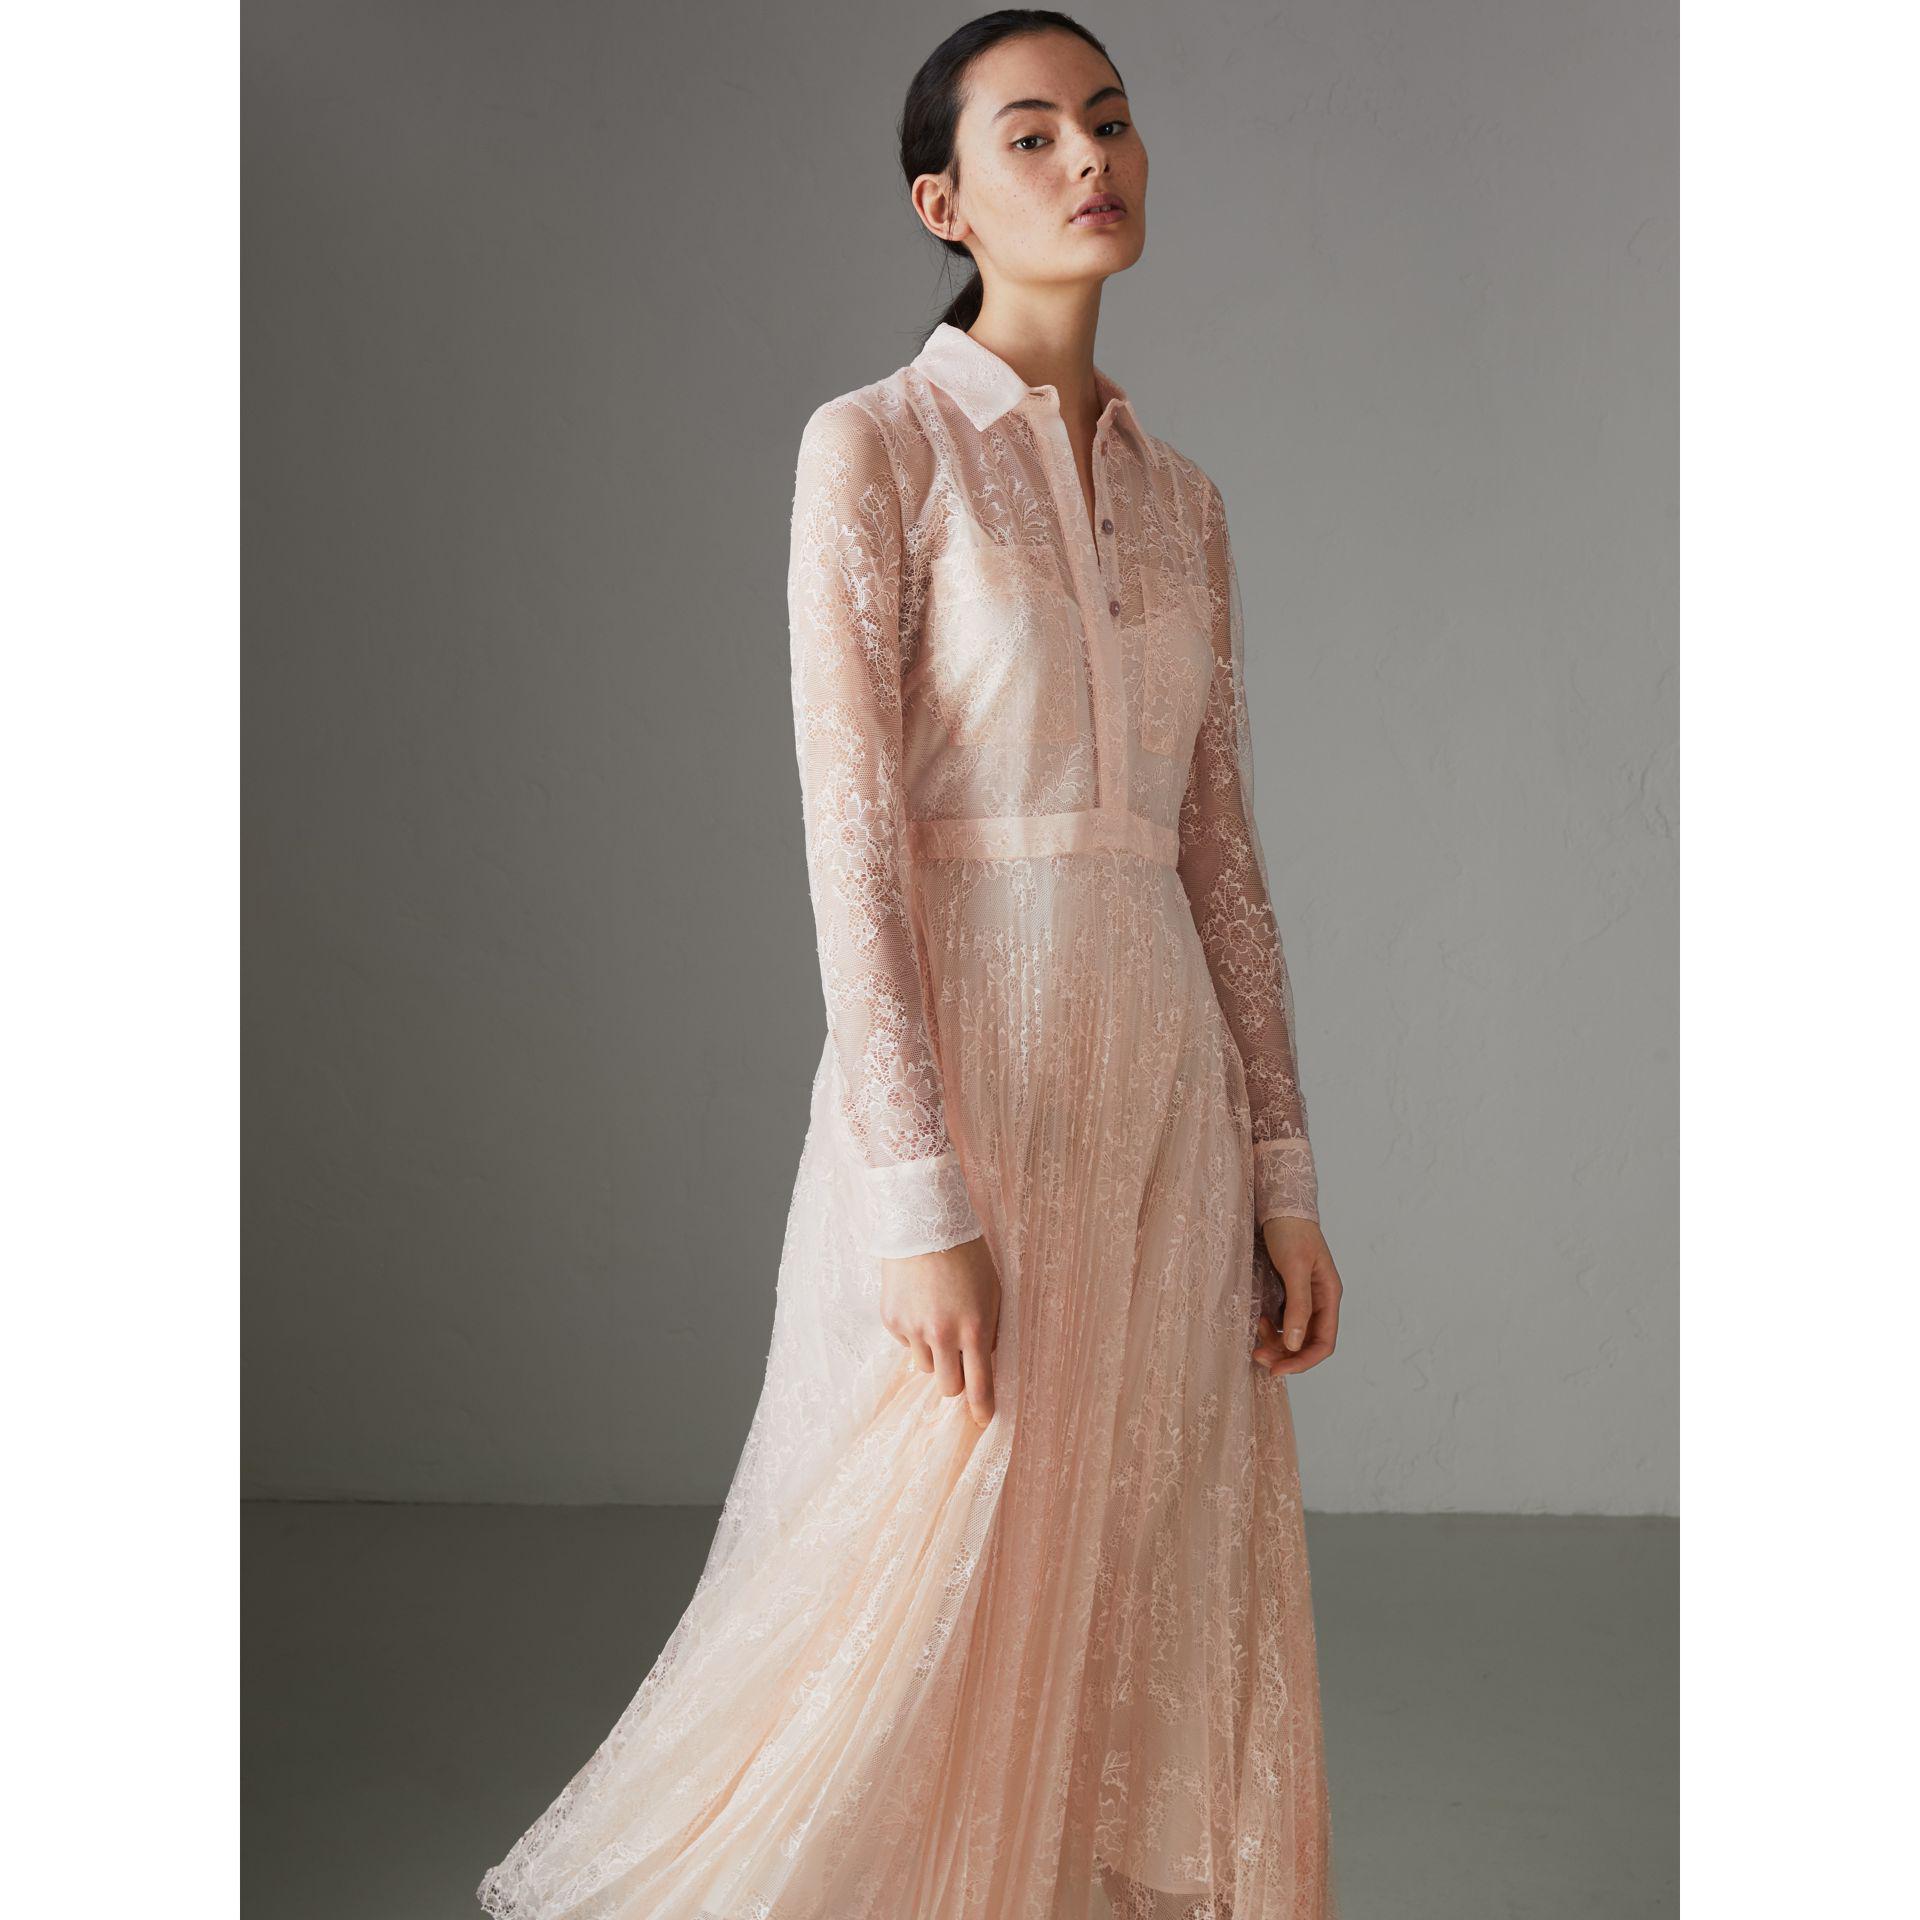 Burberry Pleated Lace Dress in Powder Pink (Pink) | Lyst